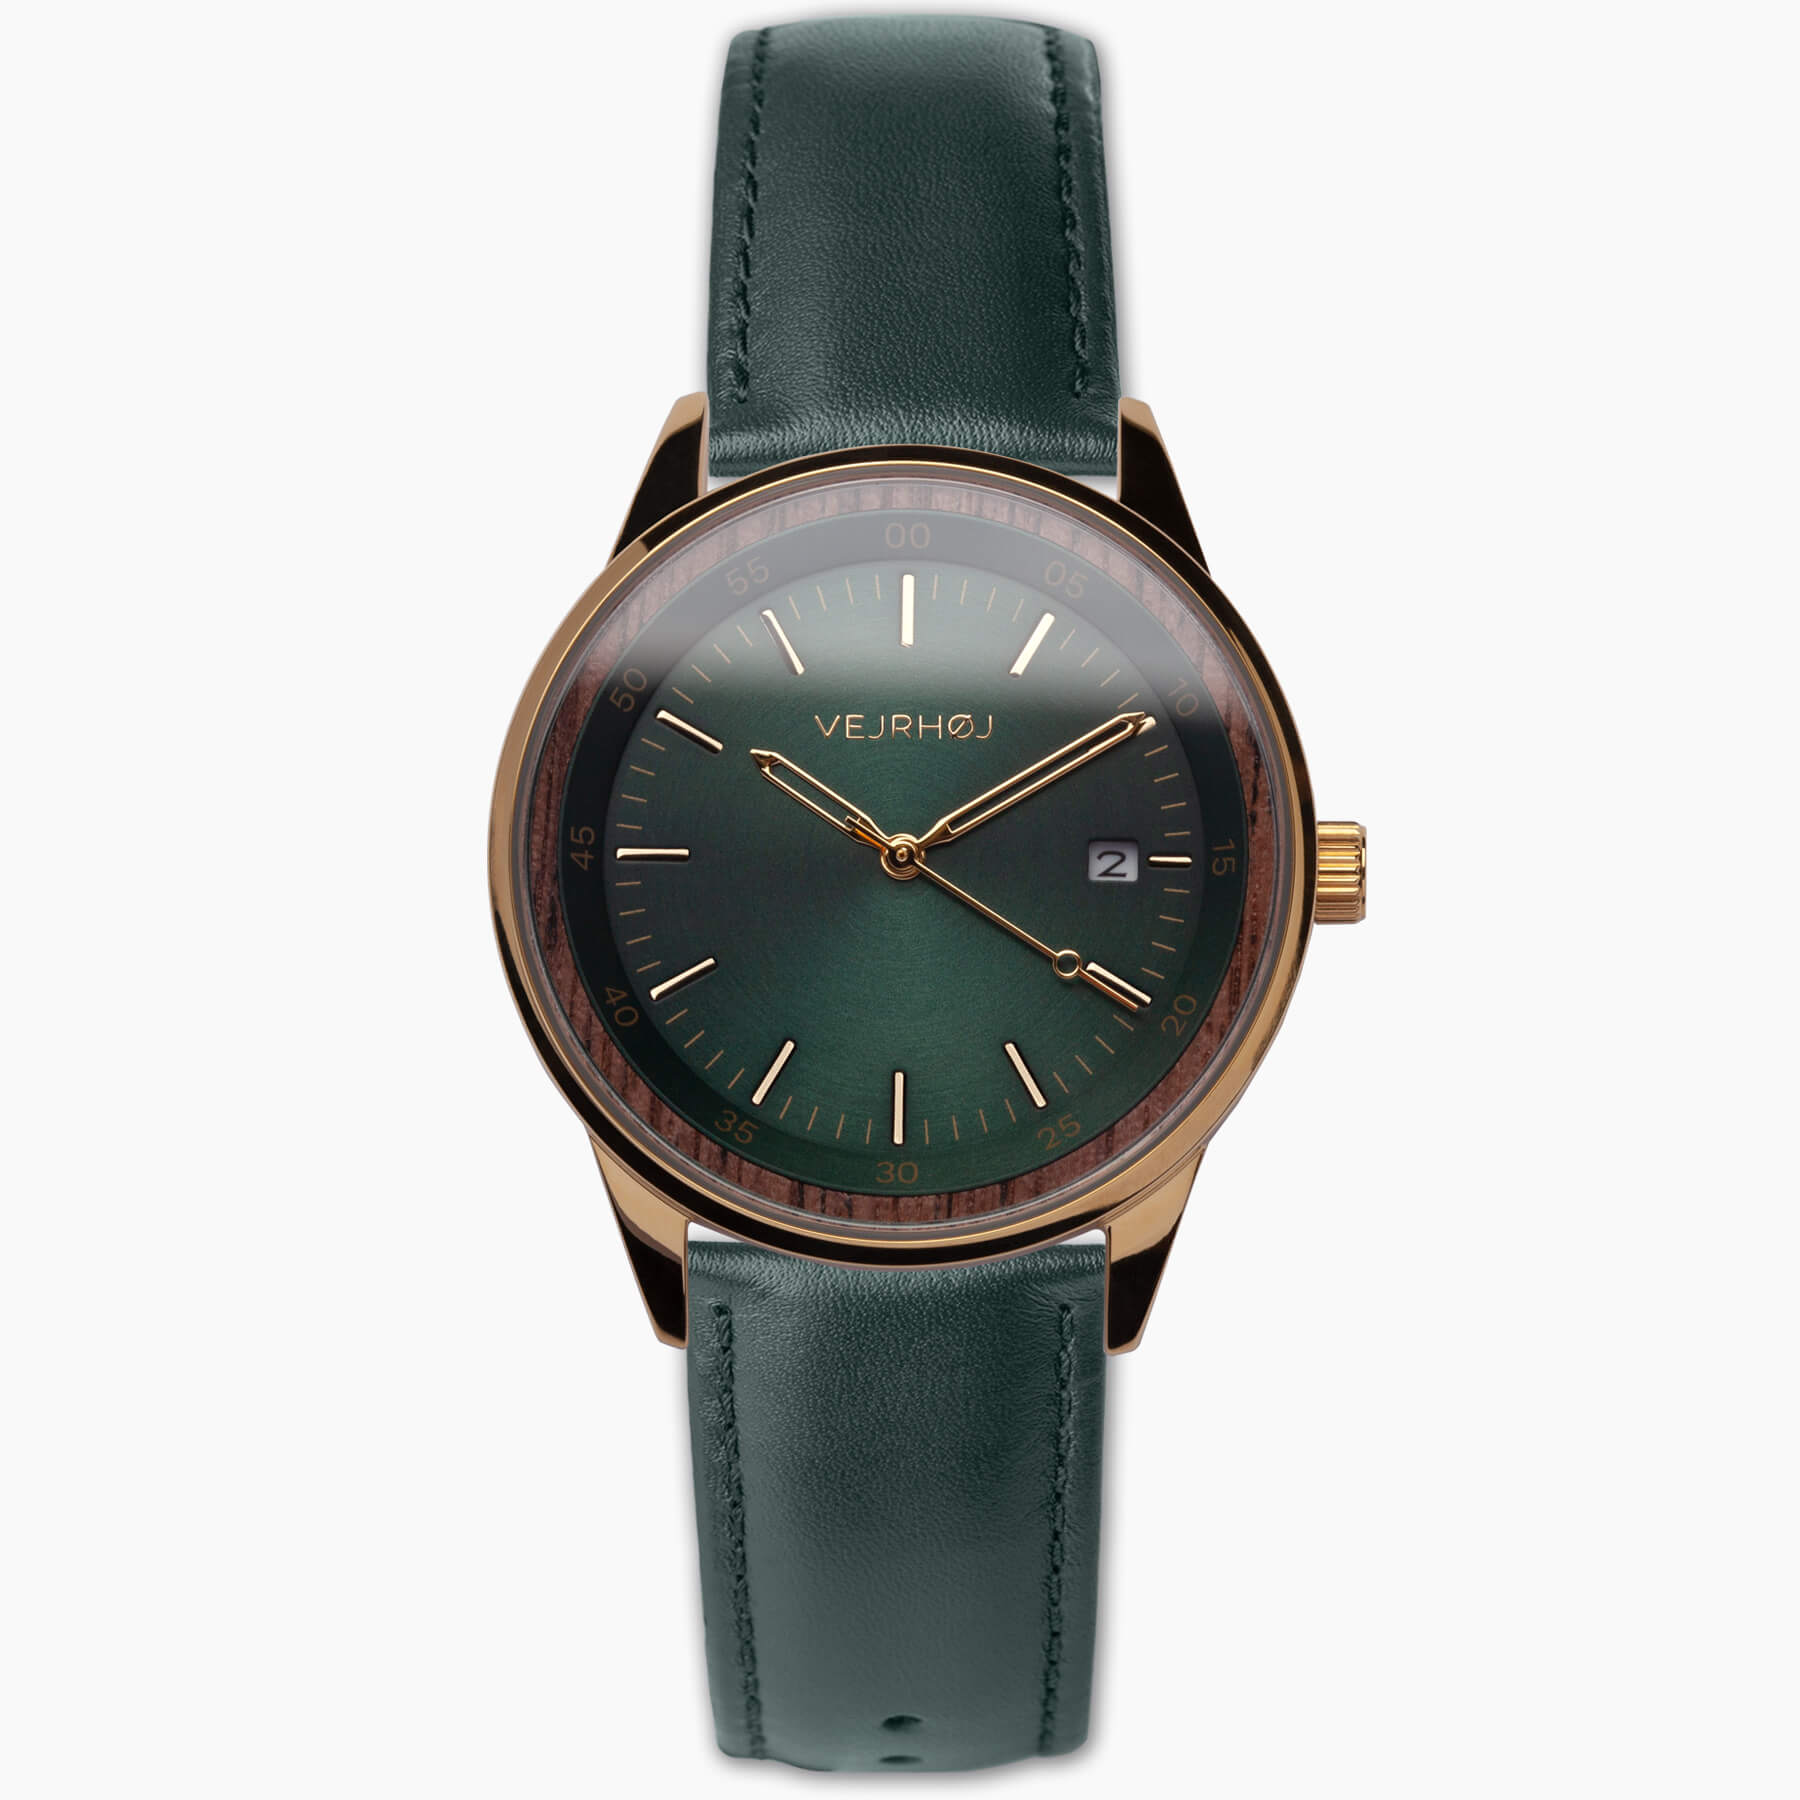 Green automatic wrist watch with green straps and golden hands from the watchmaker VEJRHØJ